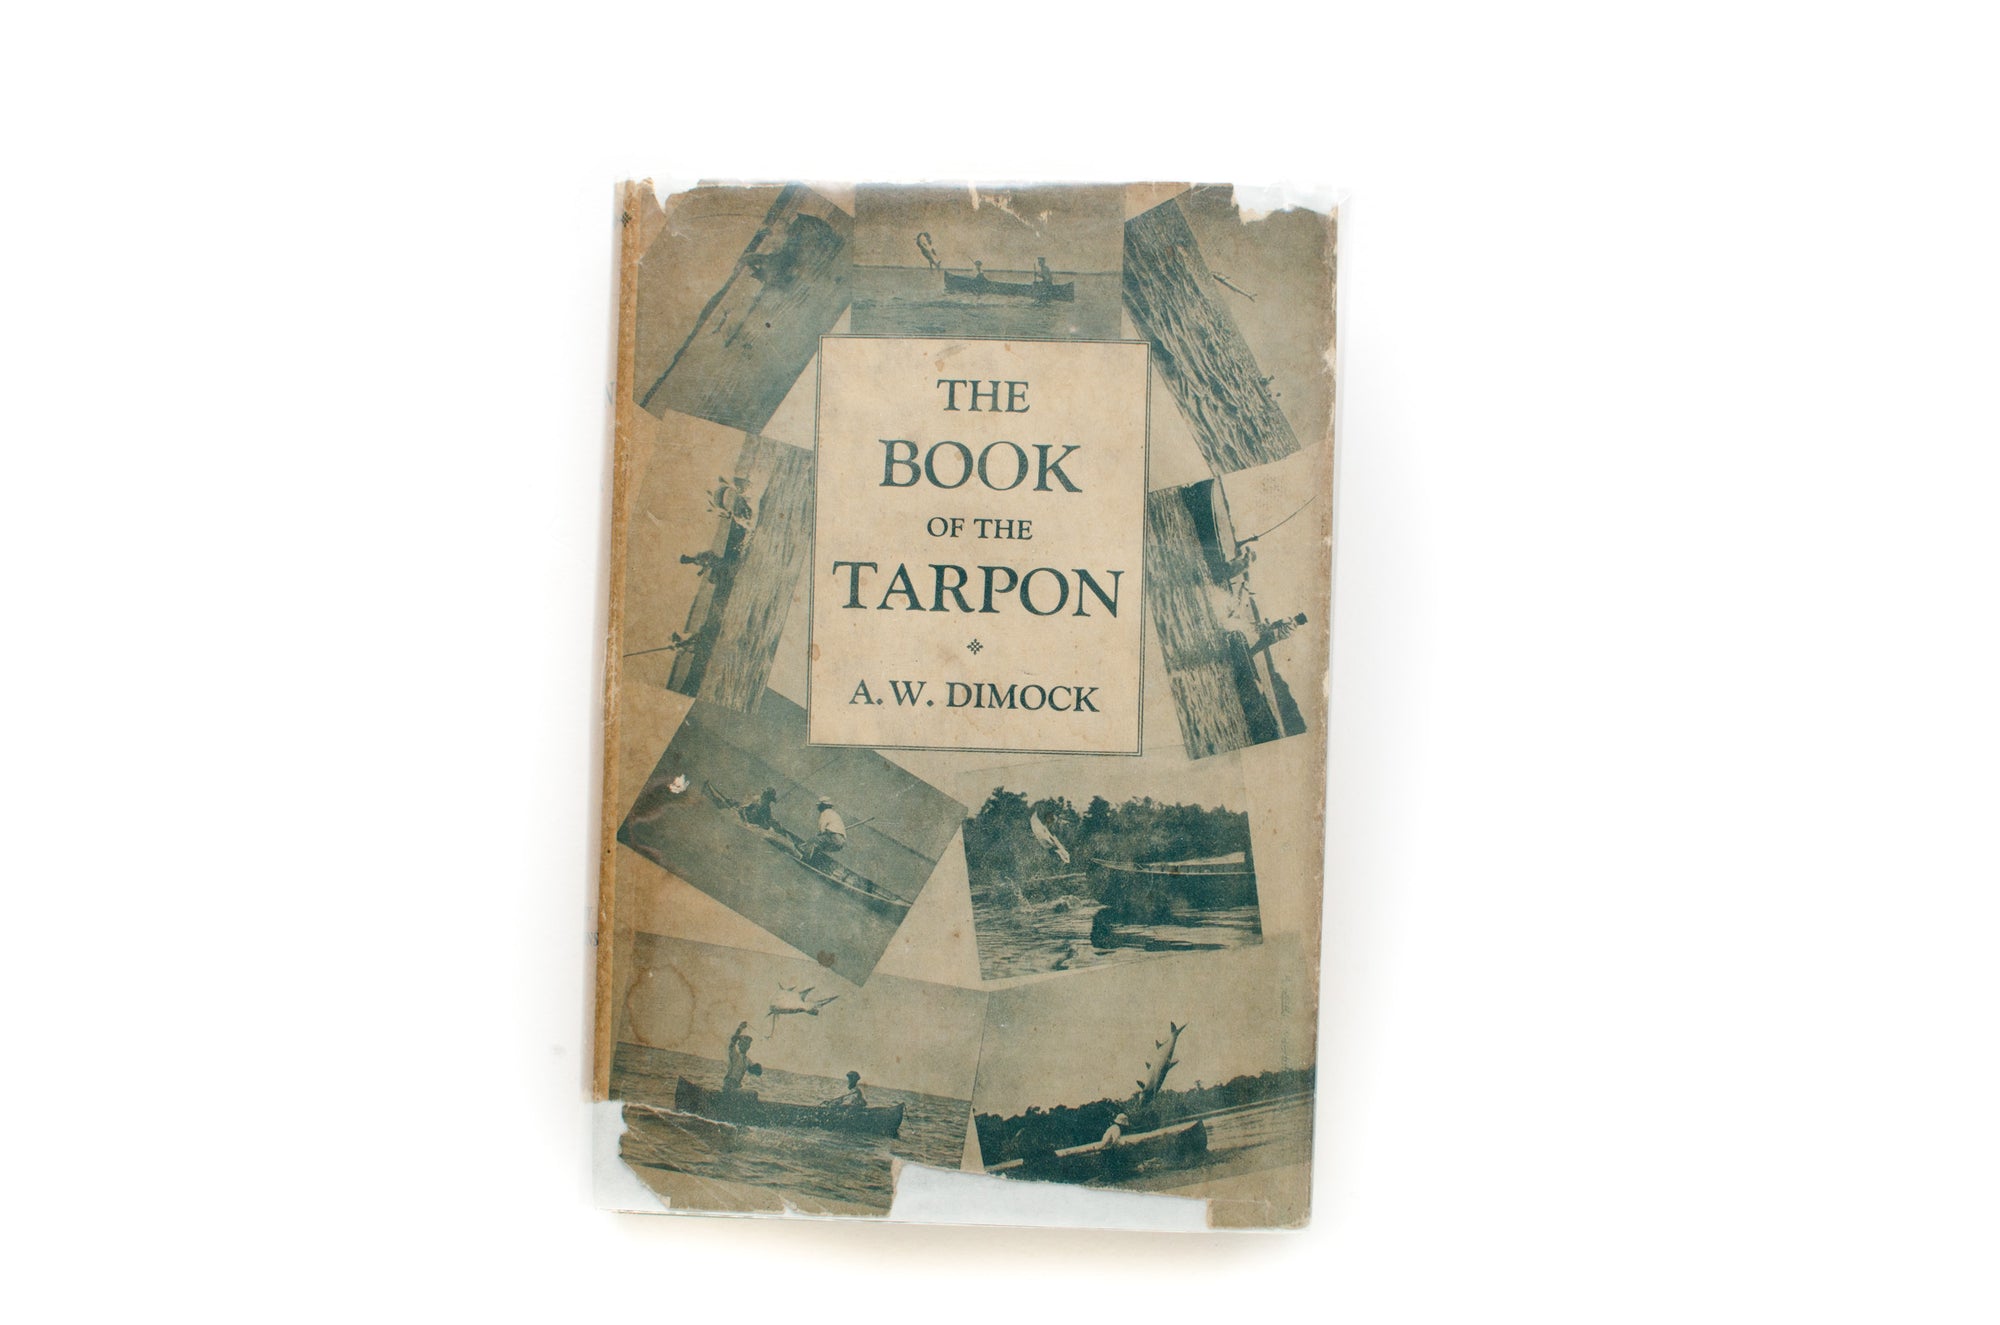 Book of the Tarpon by AW Dimock